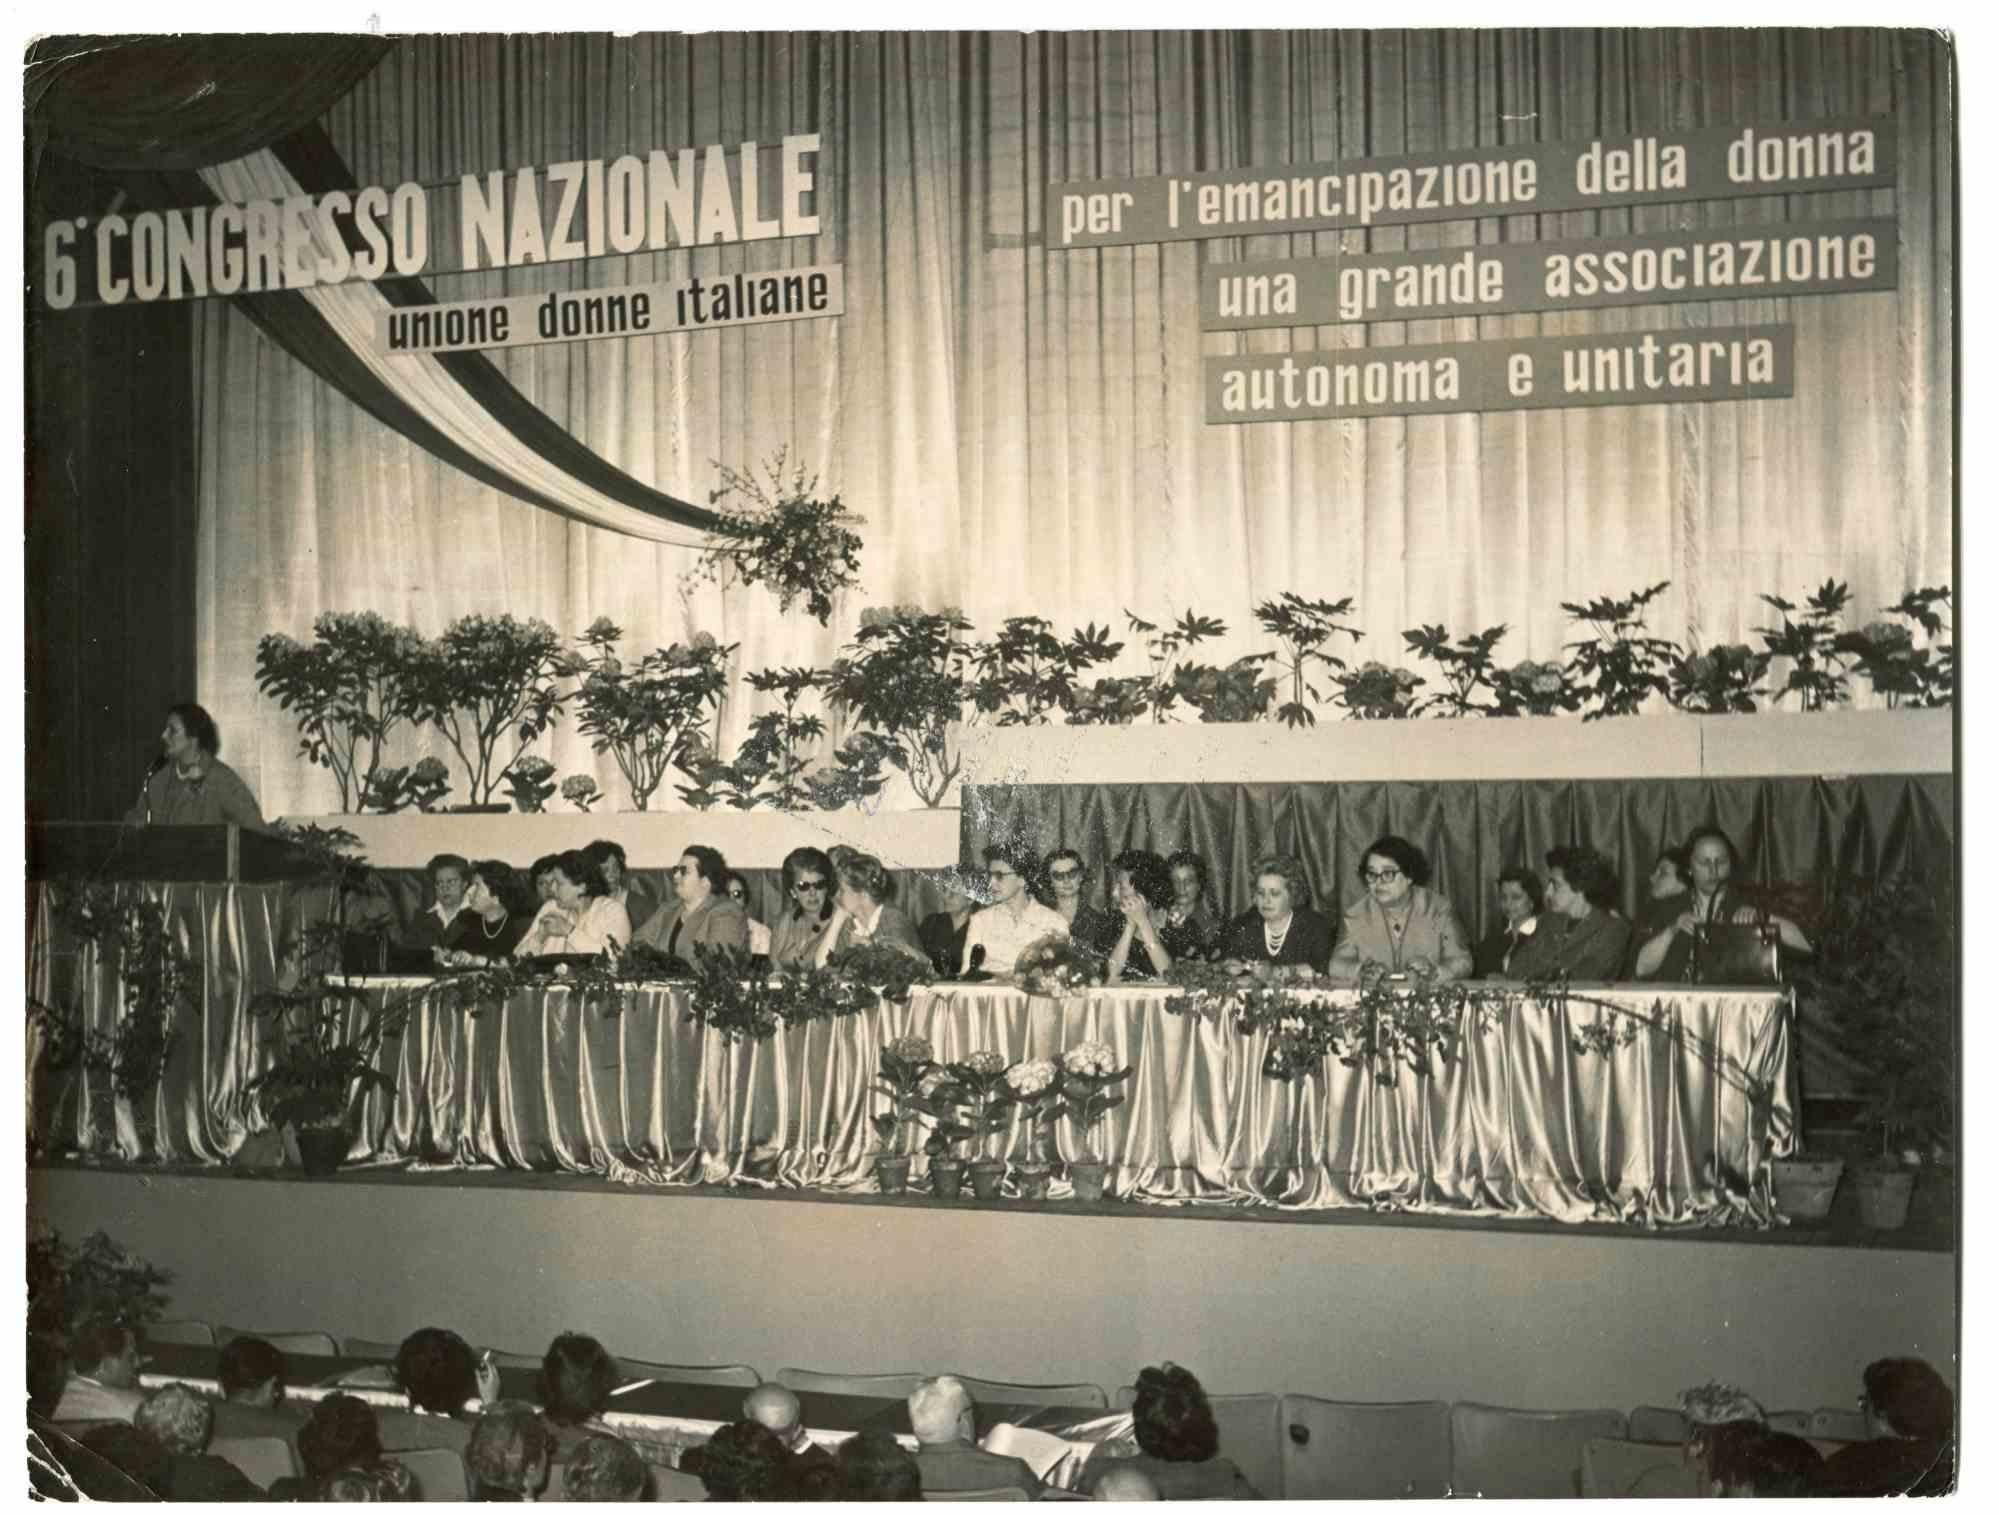 The National Congress - Historical Photograph About the Feminist Movemen - 1950s